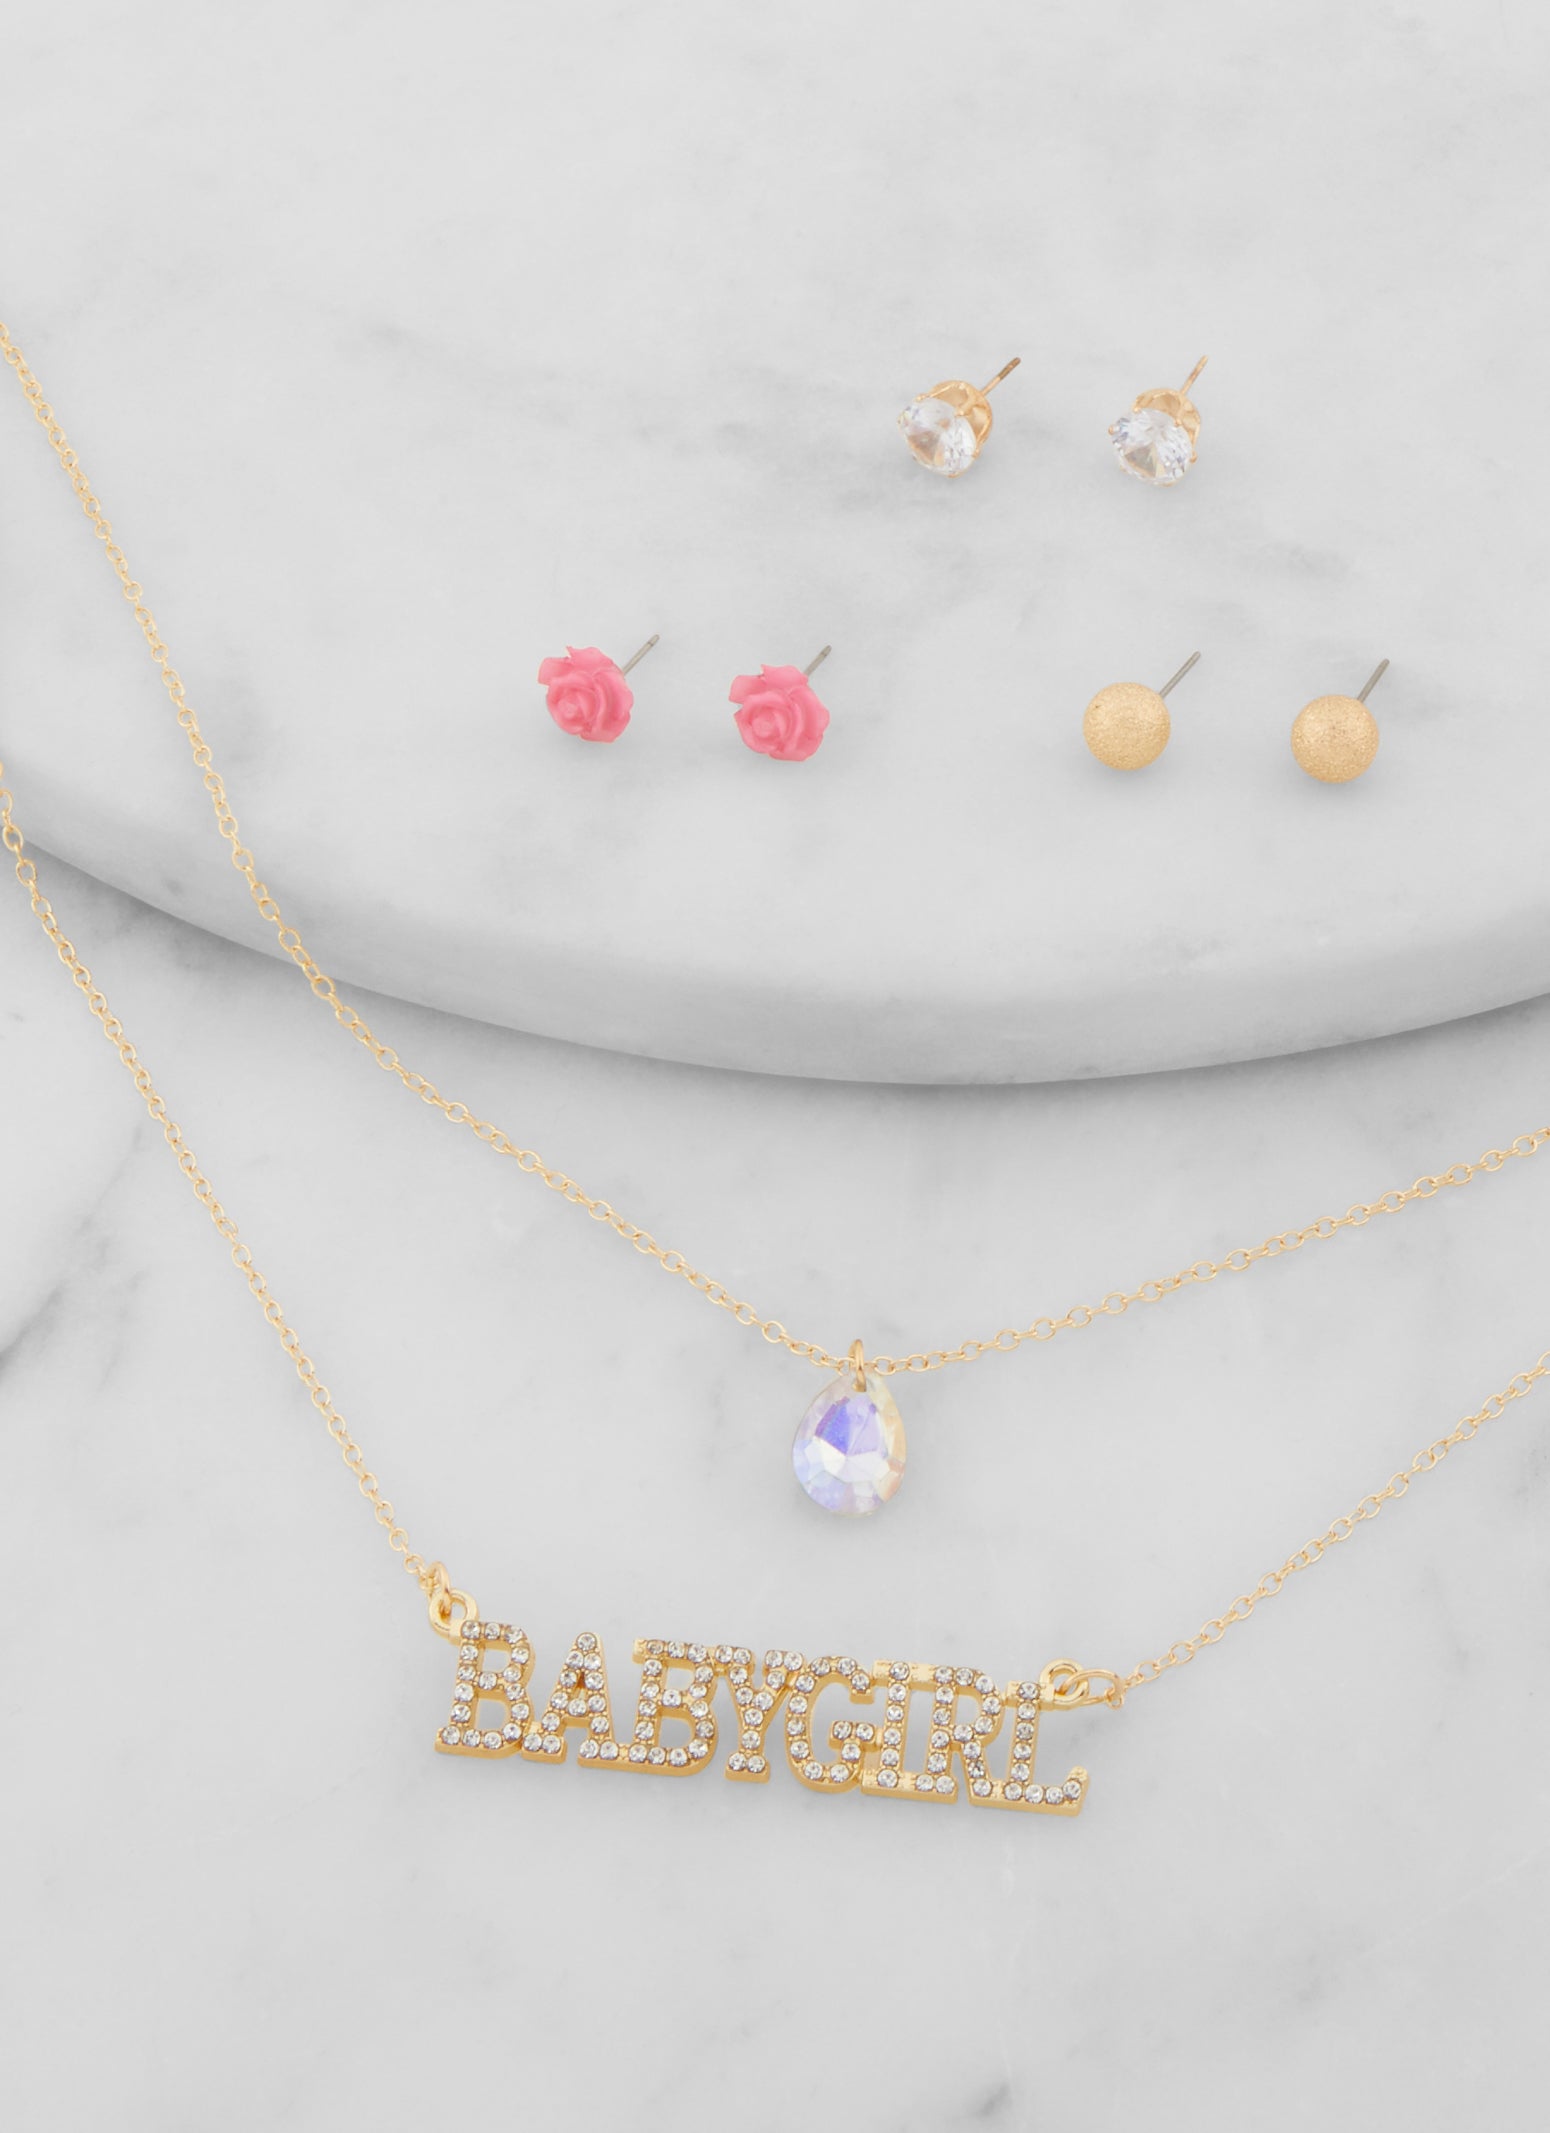 Buy 14K Gold Babygirl Necklace, 925 Silver Necklace, 22K Gold Plated  Necklace, Baby Girl Necklace, Birthday Gift, Valentines Day Gift, Halloween  Online in India - Etsy